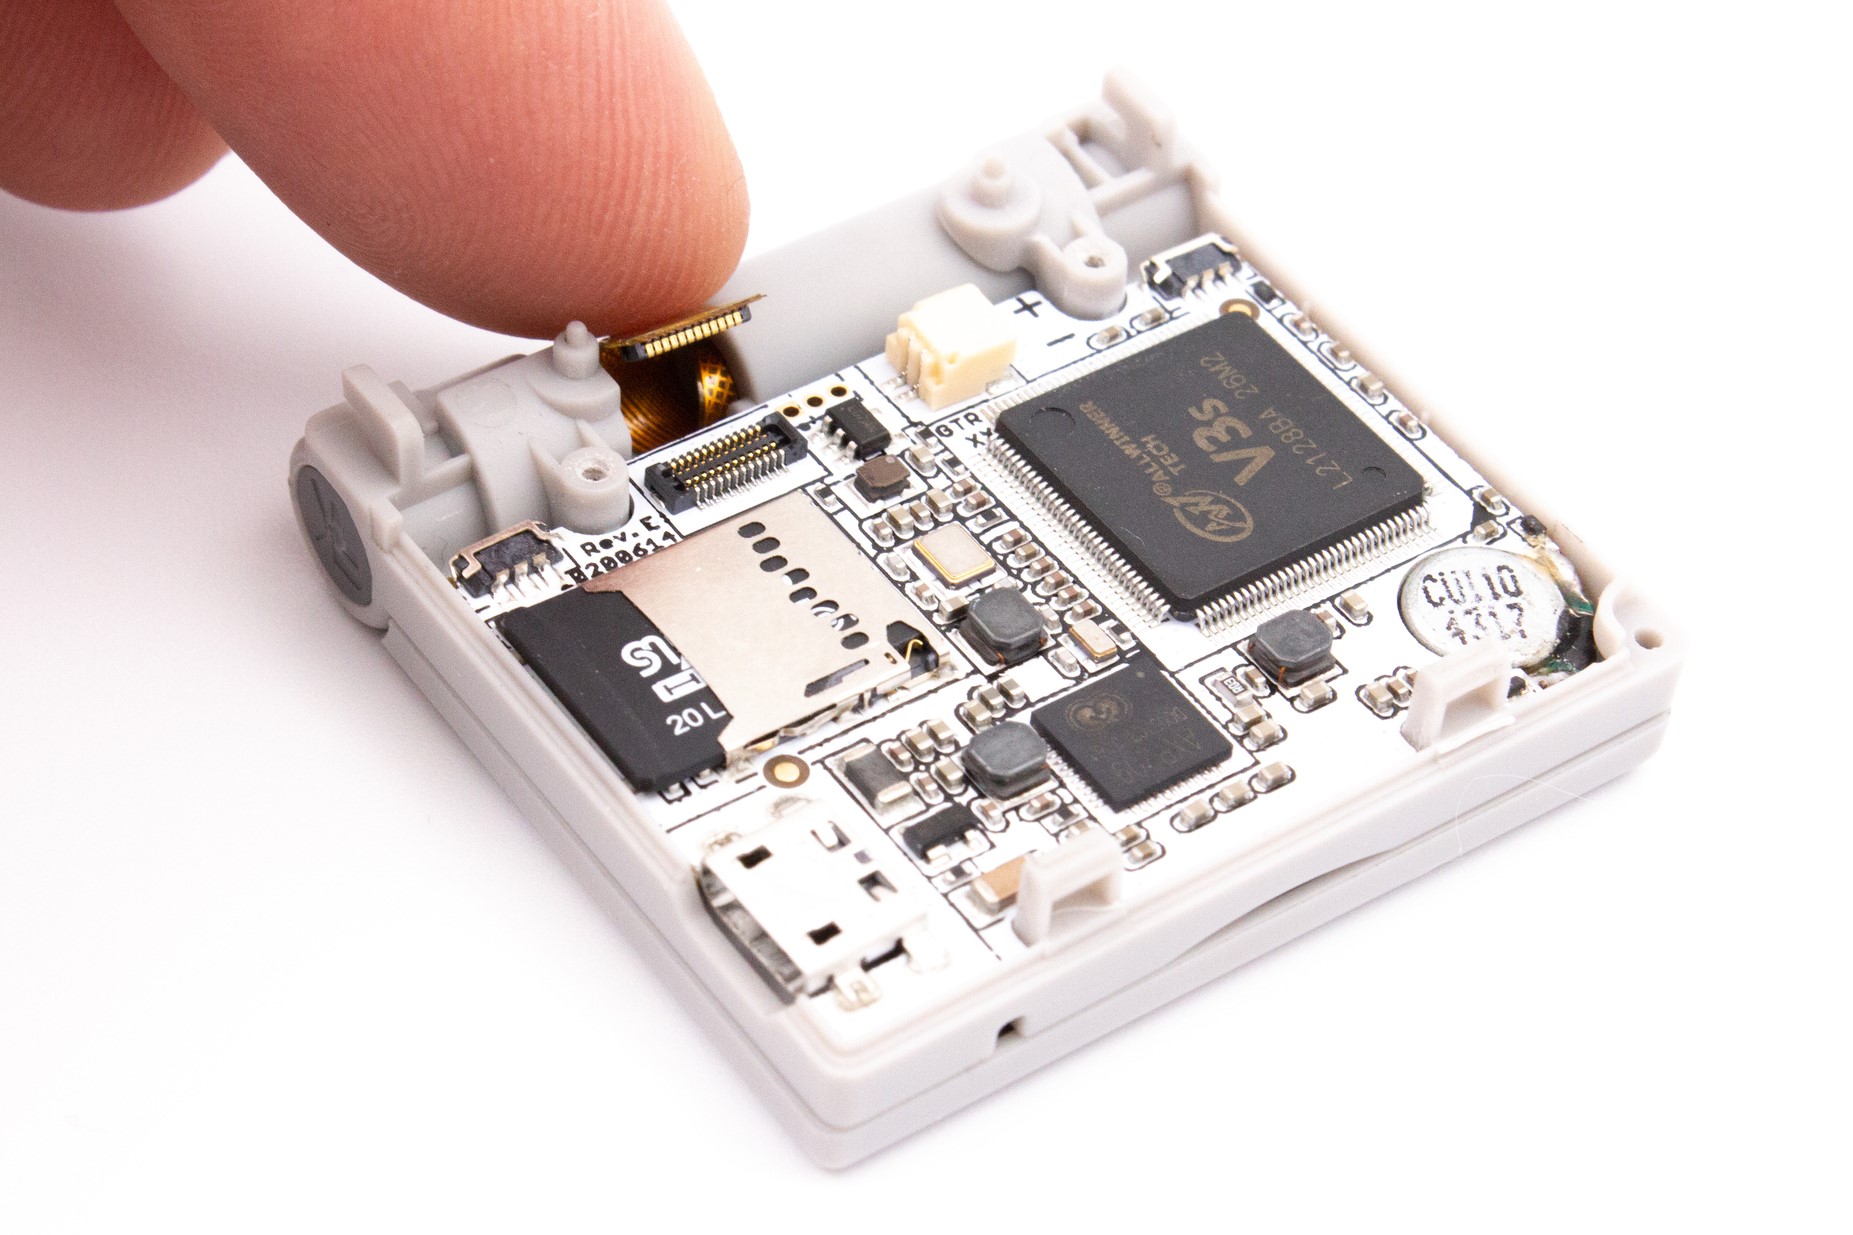 Pull PCB by its micro-USB port